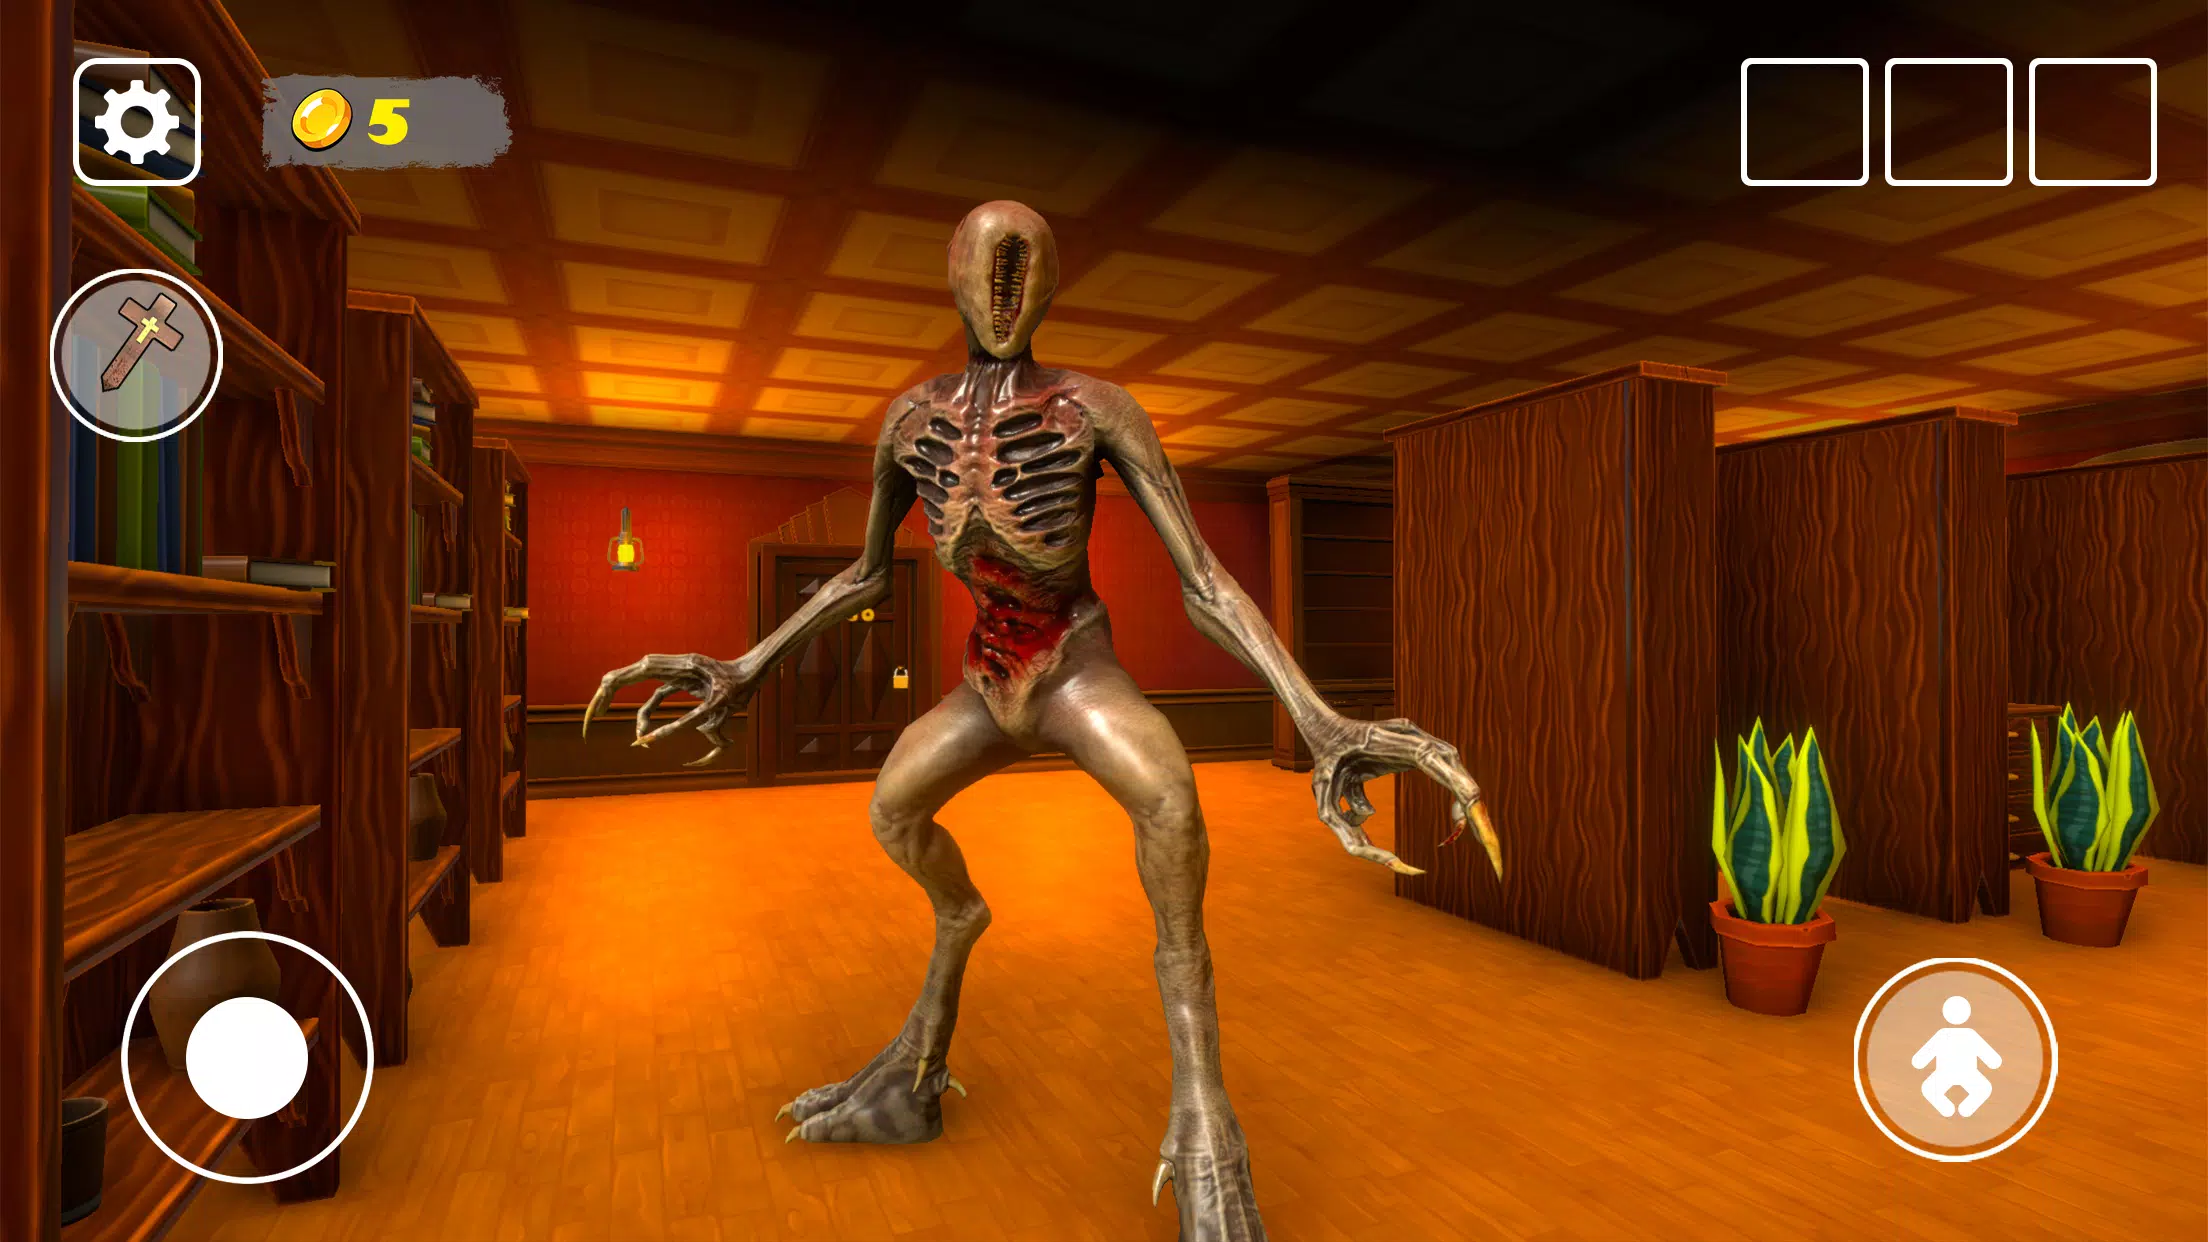 Doors 100: Obby Horror Escape - Apps on Google Play